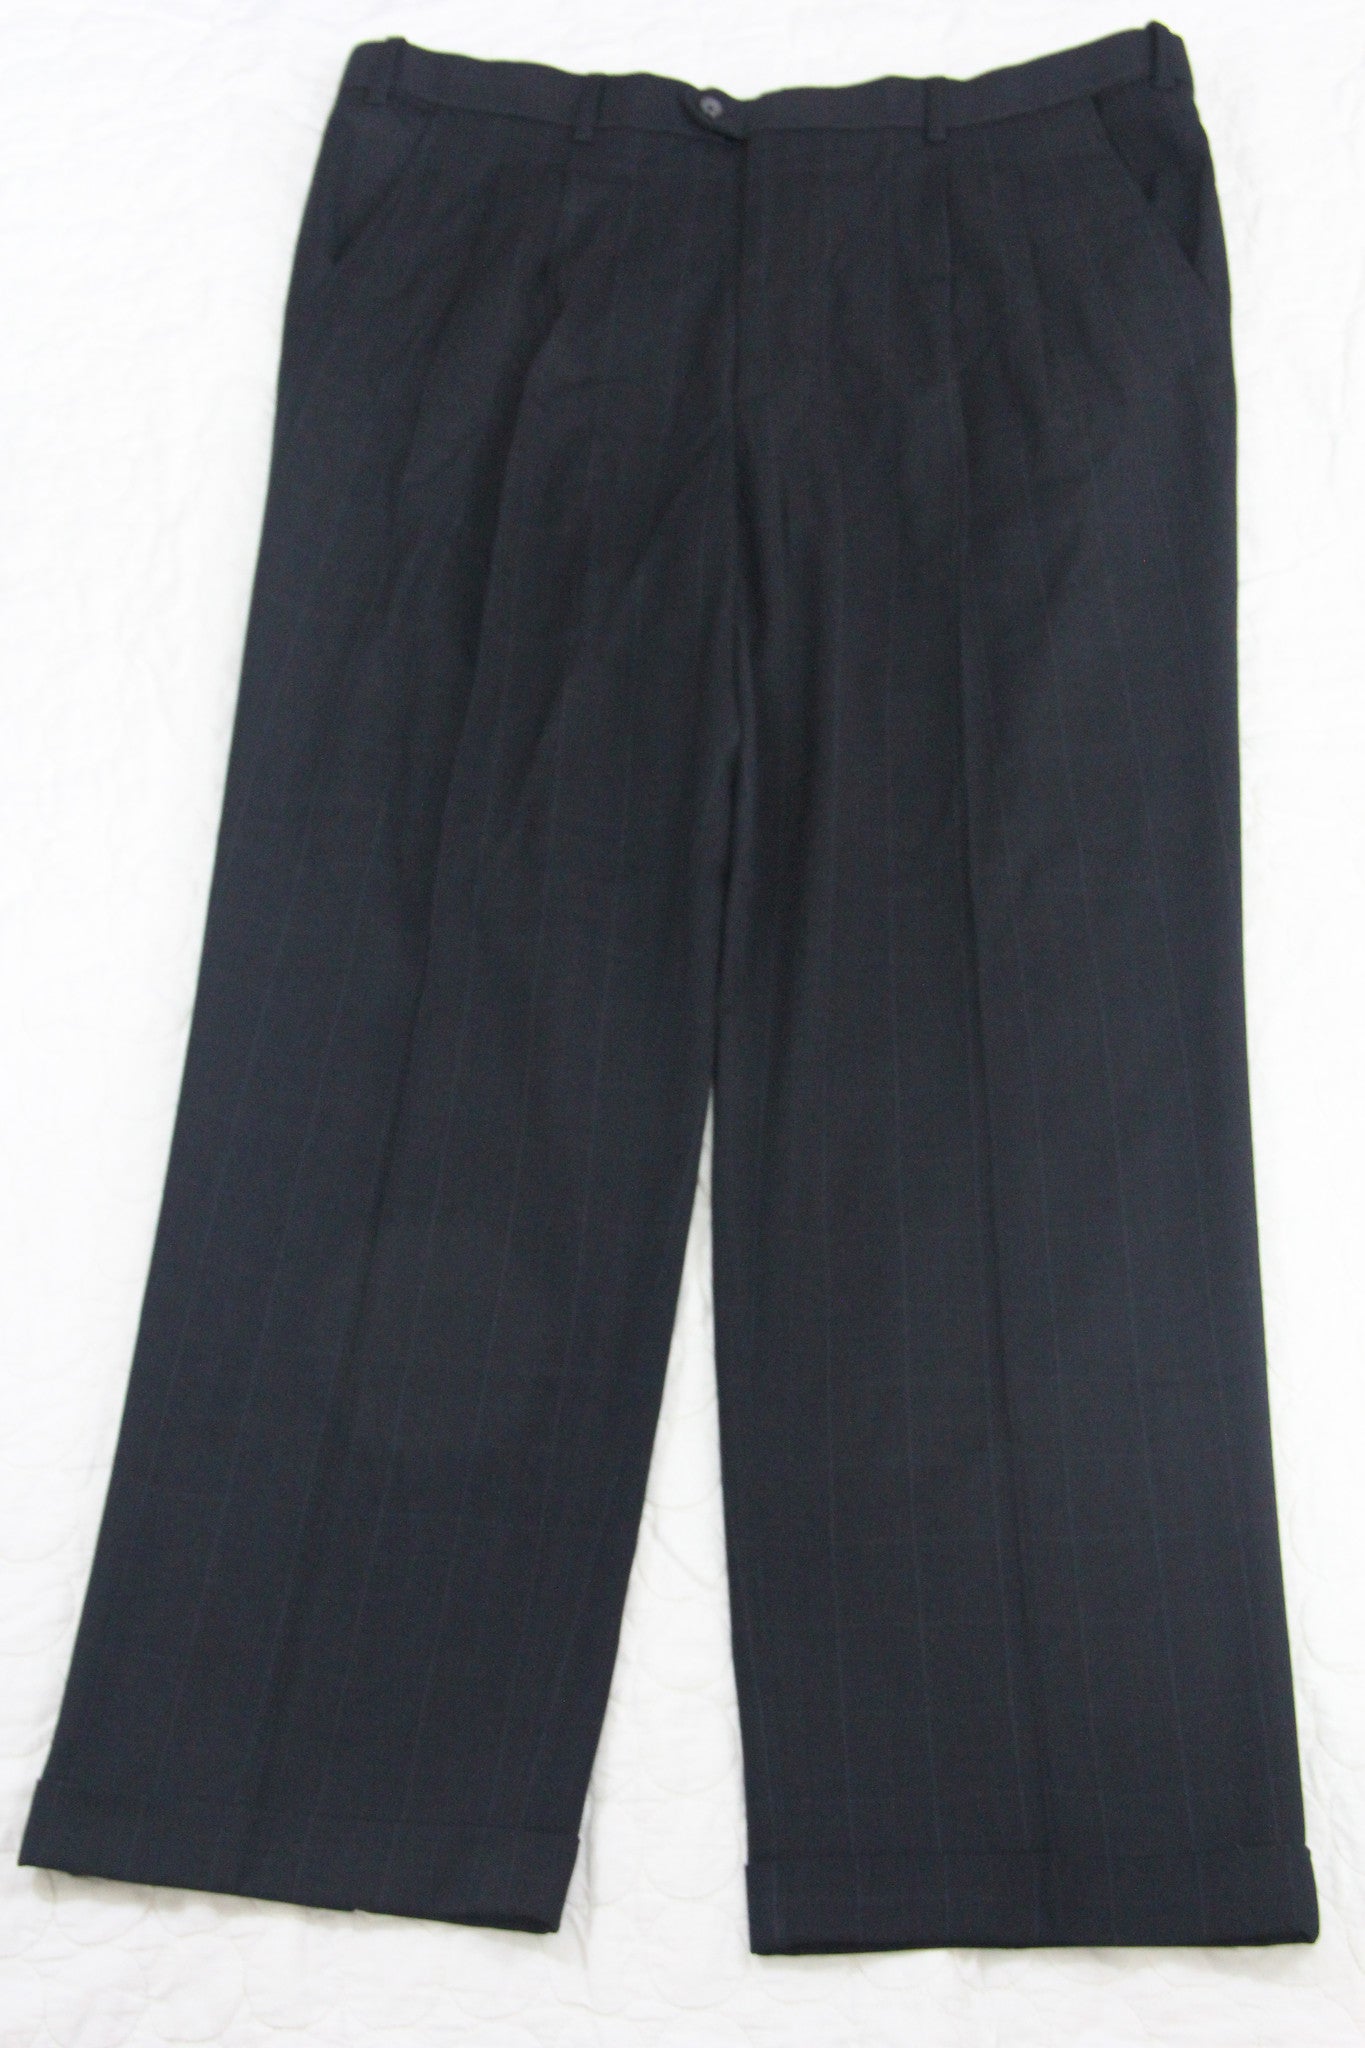 Van Heusen Dress Pants Gray with White Squares Size 40 waist, 32 length (SKU 000164) - Designers On A Dime